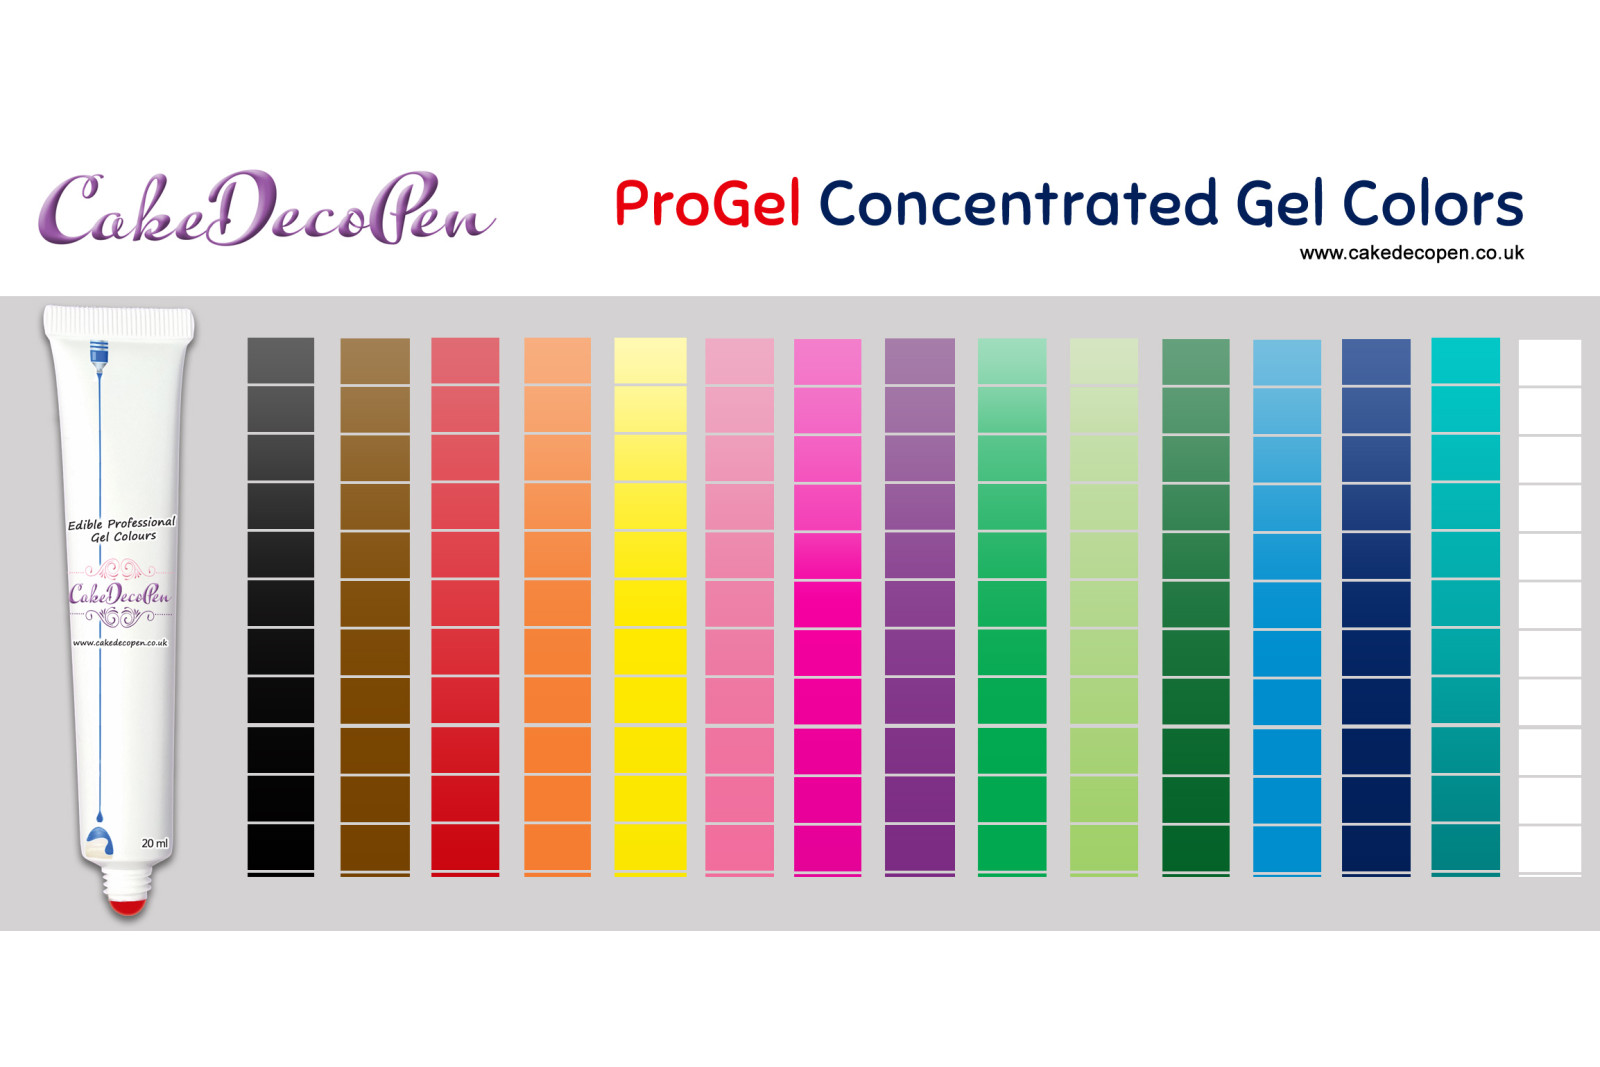 White | Gel Food Colors | Concentrated ProGel | Cake Decorating | 30 ML | Christmas Edible Decorating Colours